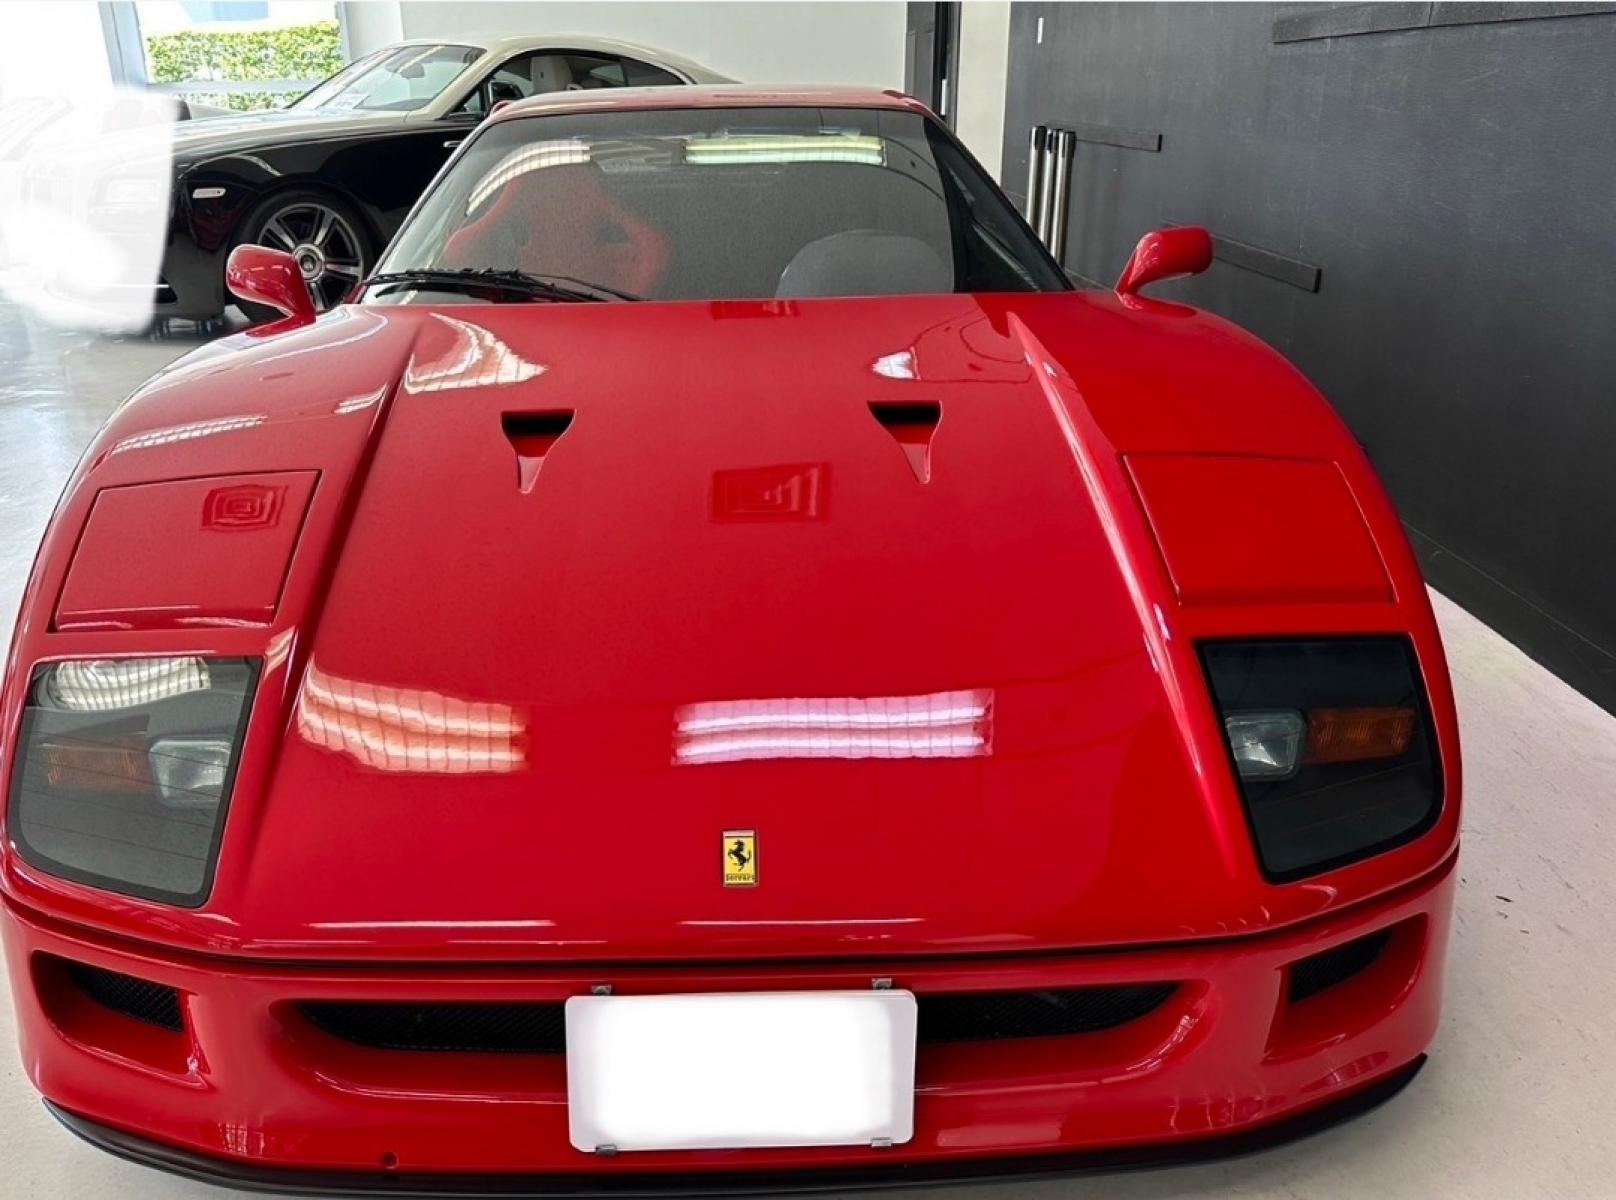 1990 Red Ferrari F40 , 0.000000, 0.000000 - 1990 Ferrari F40 1990 delivered as new in France 1992 delivered to 2nd owner in Japan from France. 2003 current owner All service record from present owner All repaint for refresh perfect skill Exchanged new cutch and master last month, was reupholstered both of the seat new fabric and spong - Photo #4